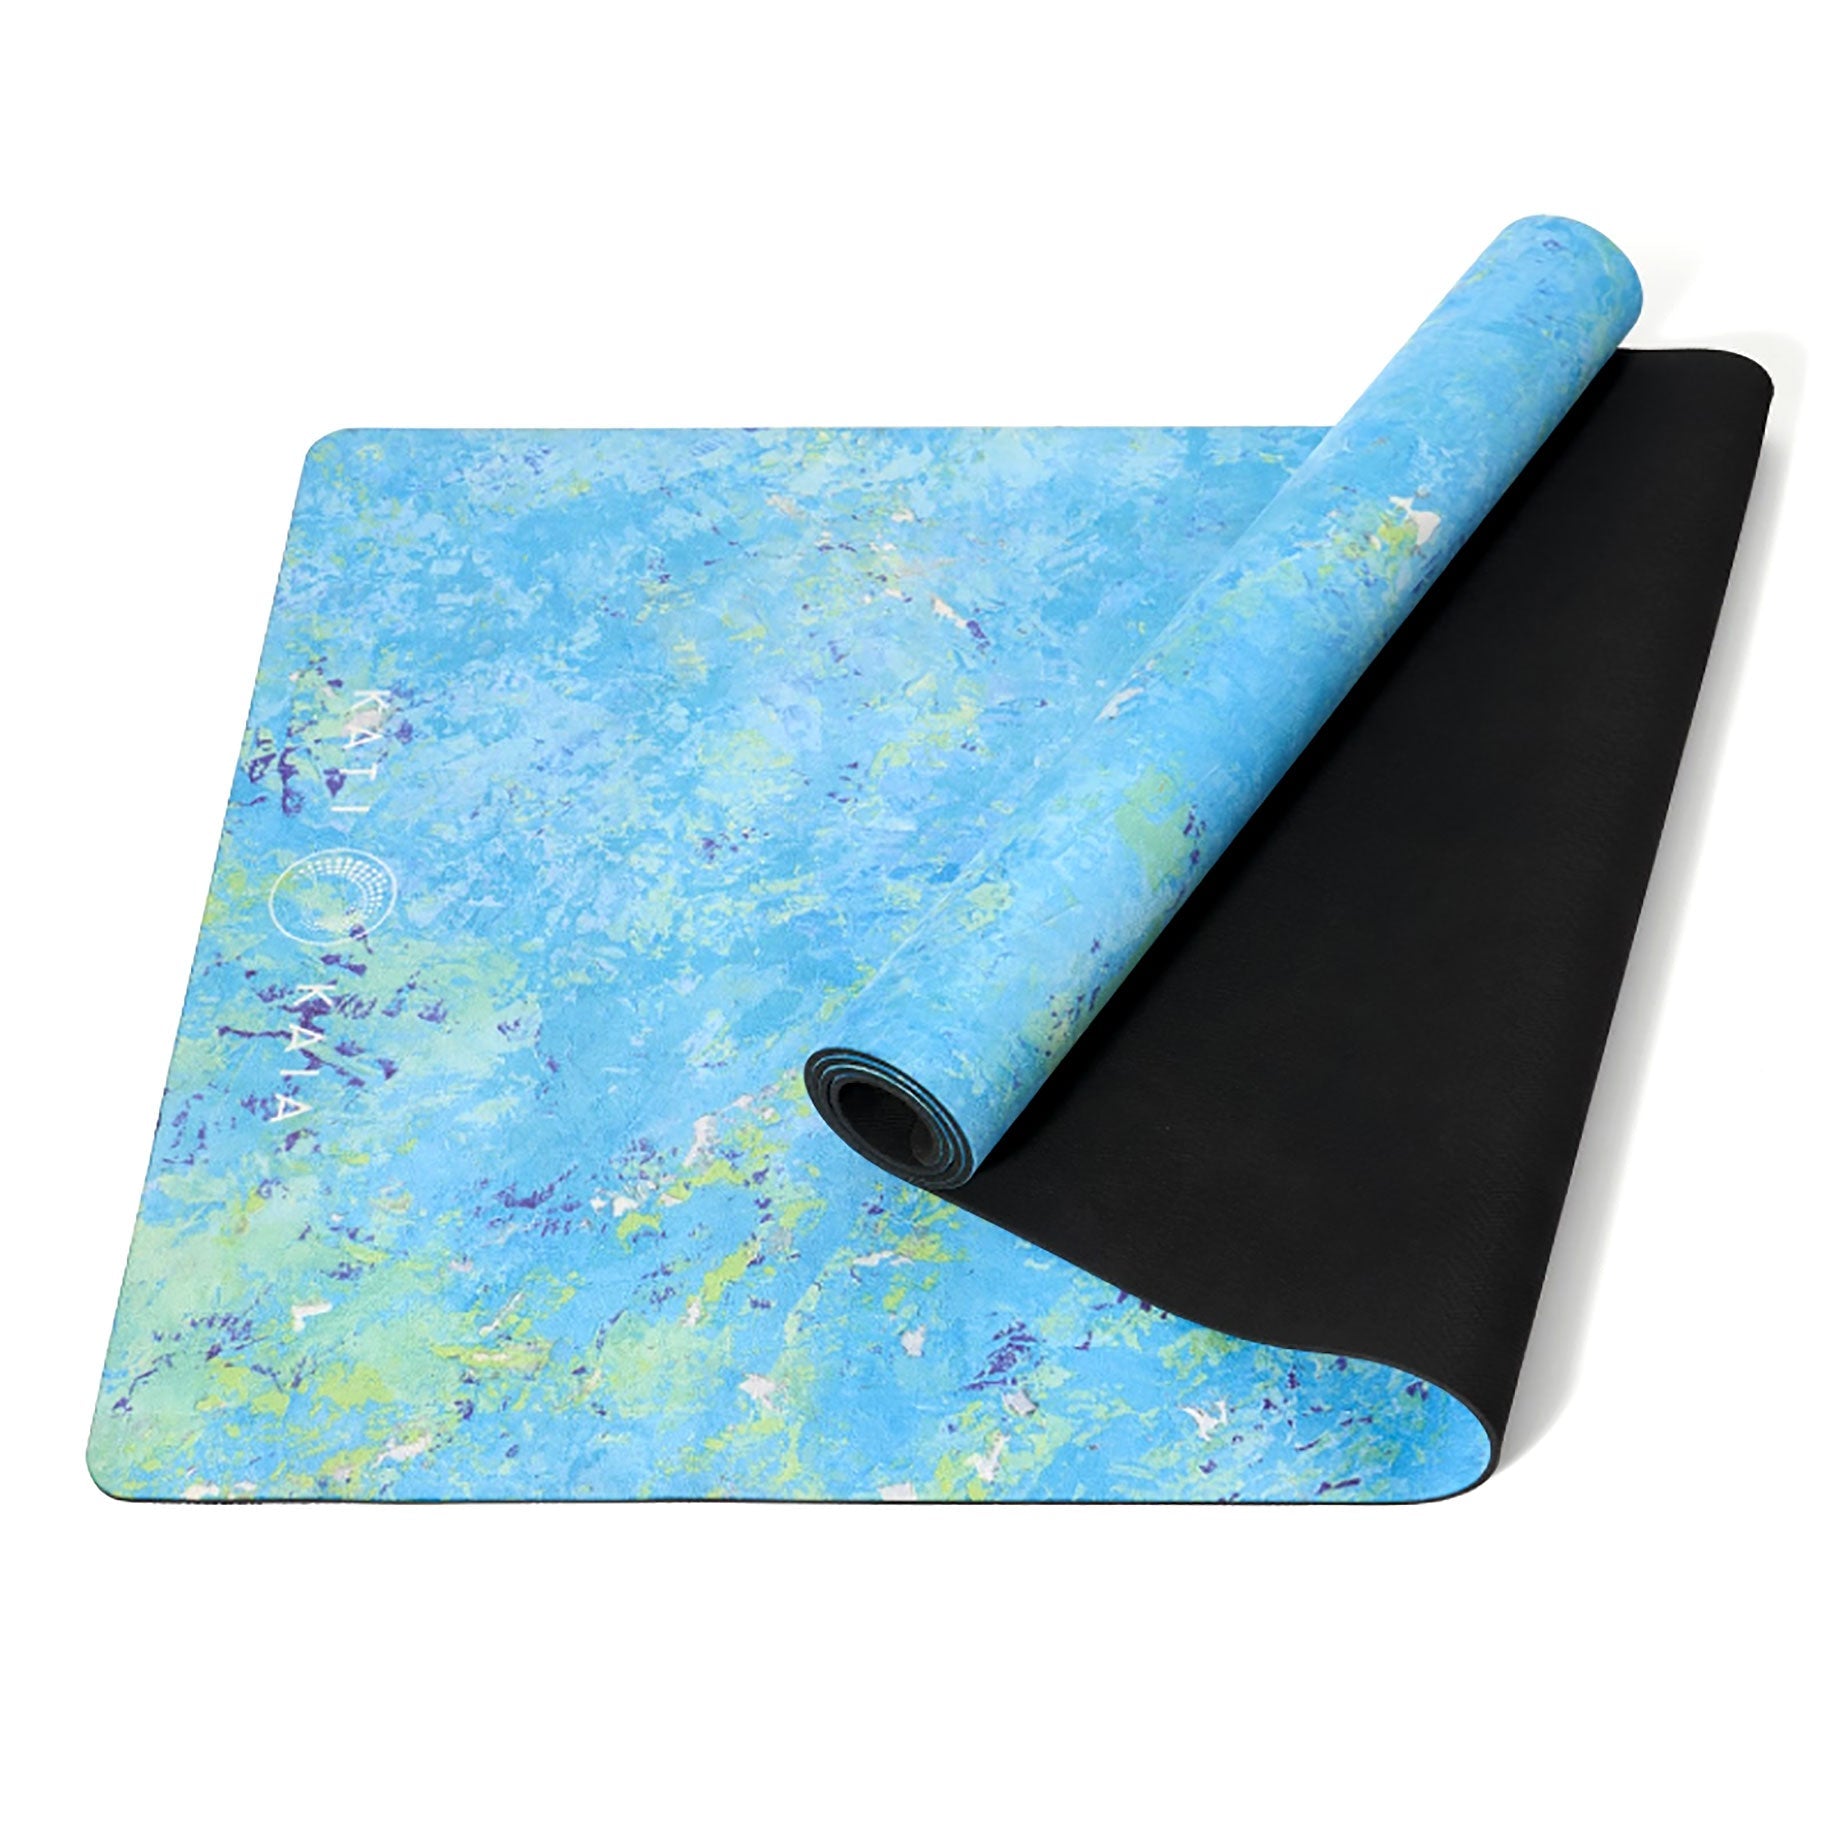 Wholesale Yoga & Meditation Supplies Made in Canada – Love My Mat